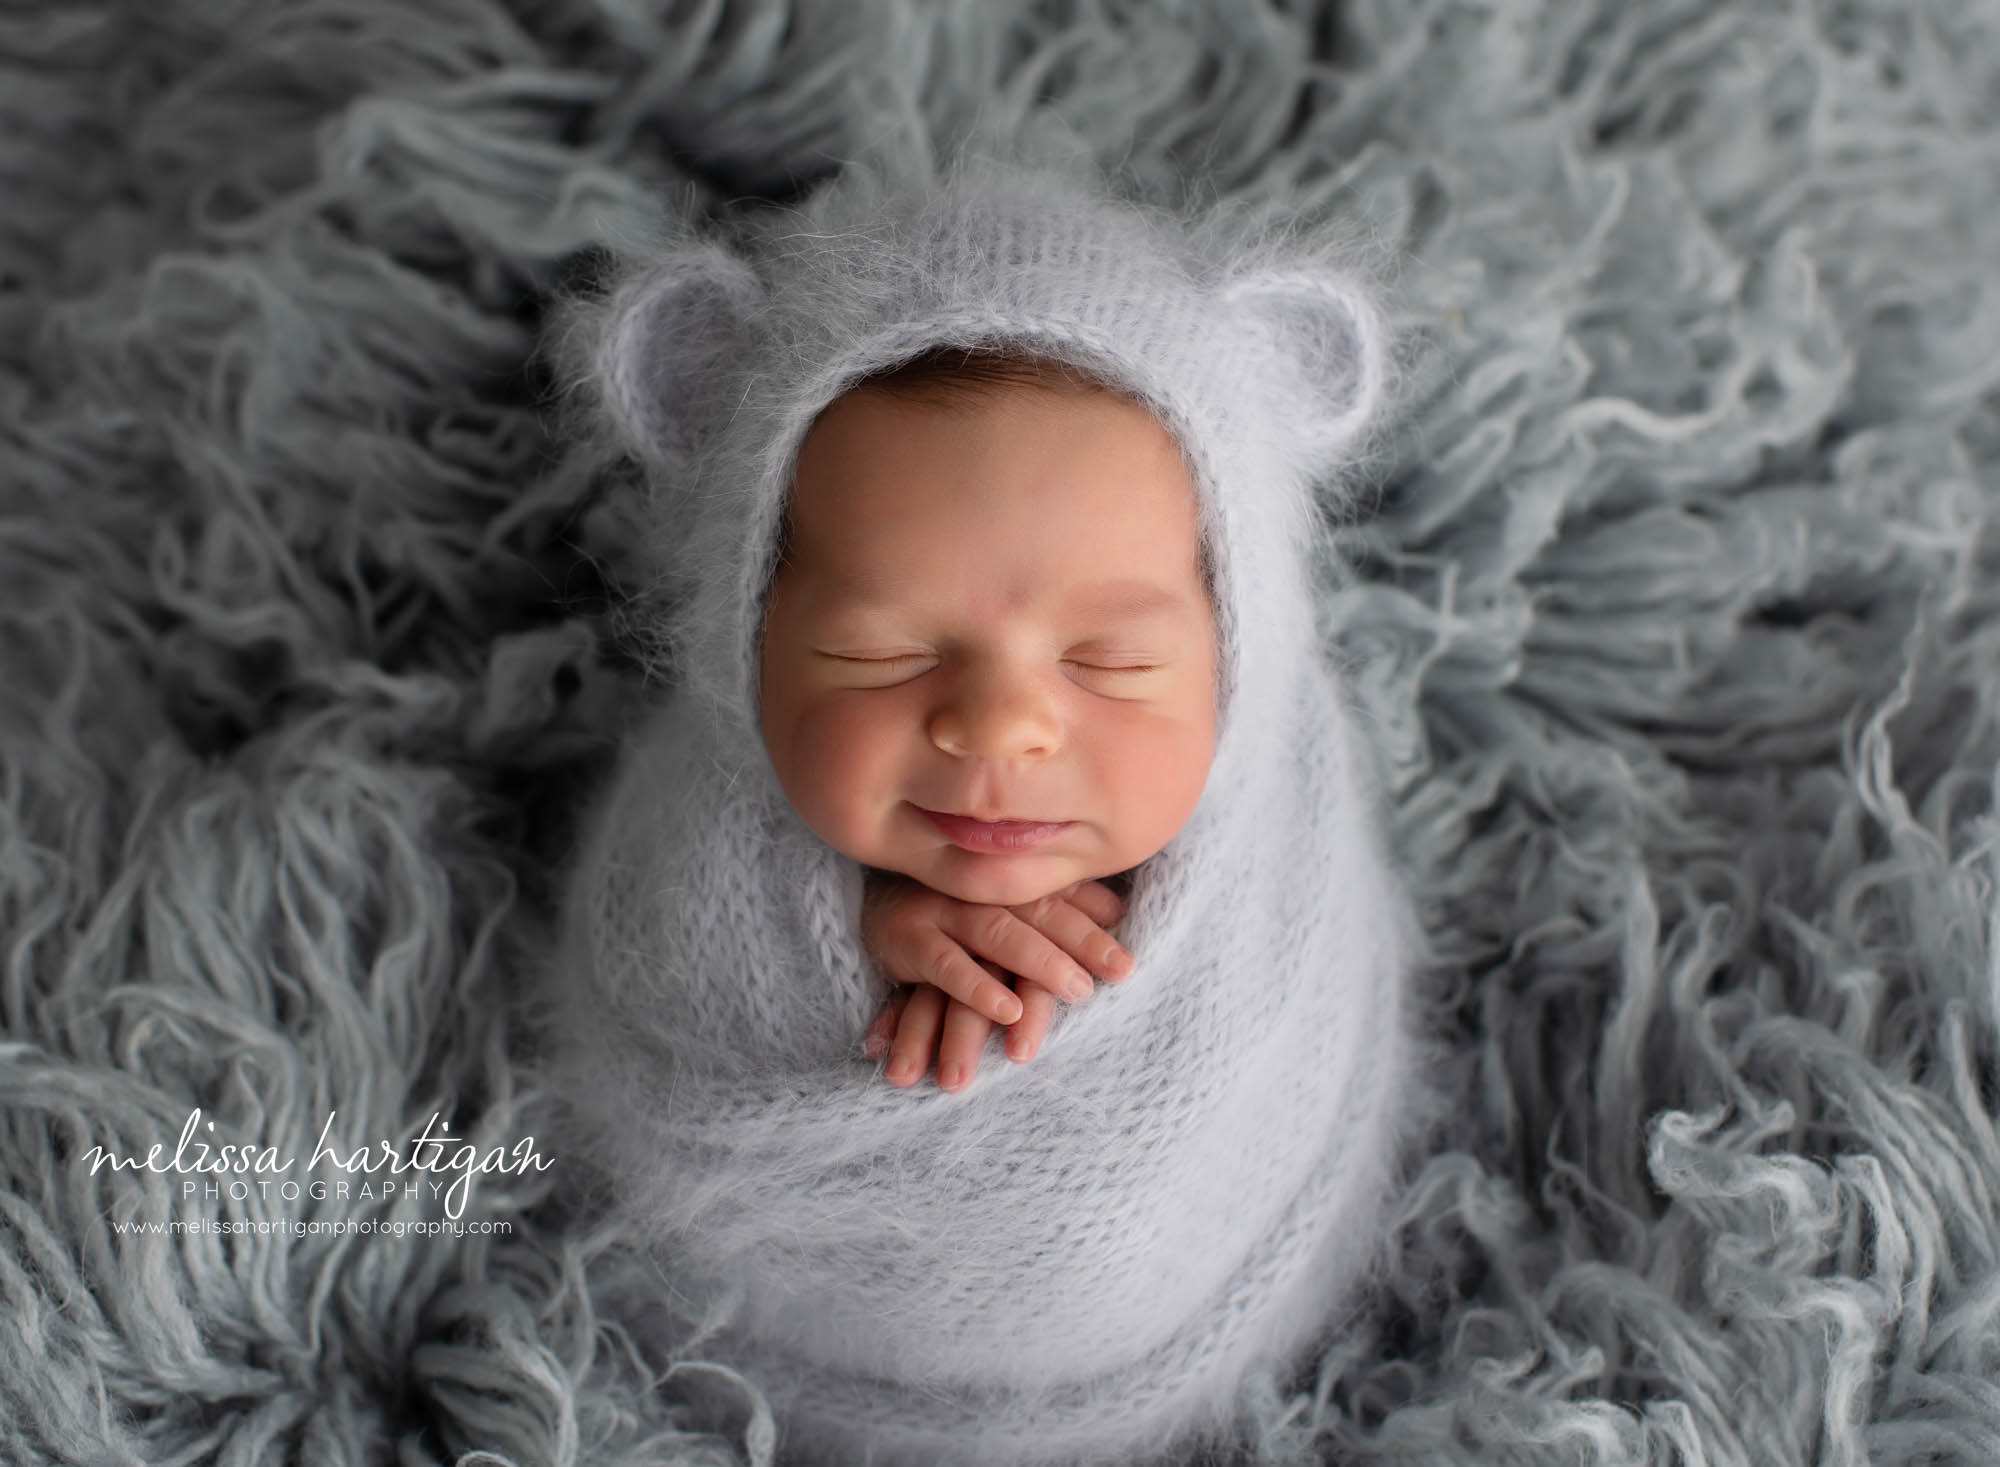 Newborn boy wrapped in light gray knitted wrap and matching knitted bear bonnet on gray flokati